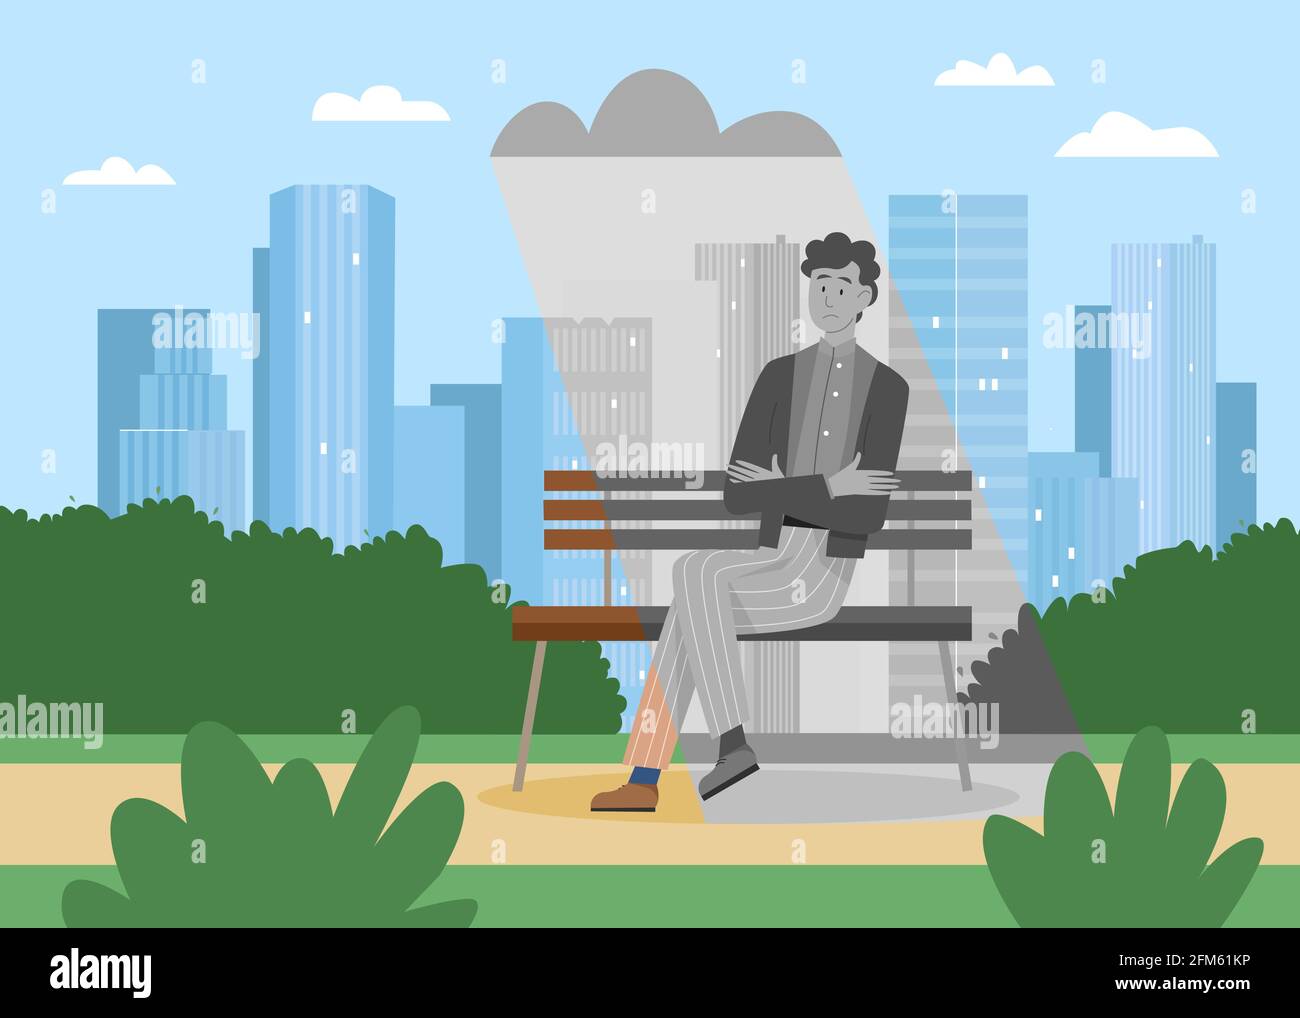 Mental stress problem, loneliness concept vector illustration. Cartoon sad upset lonely man character sitting on city park bench alone under cloud of depression, worrying about problem background Stock Vector